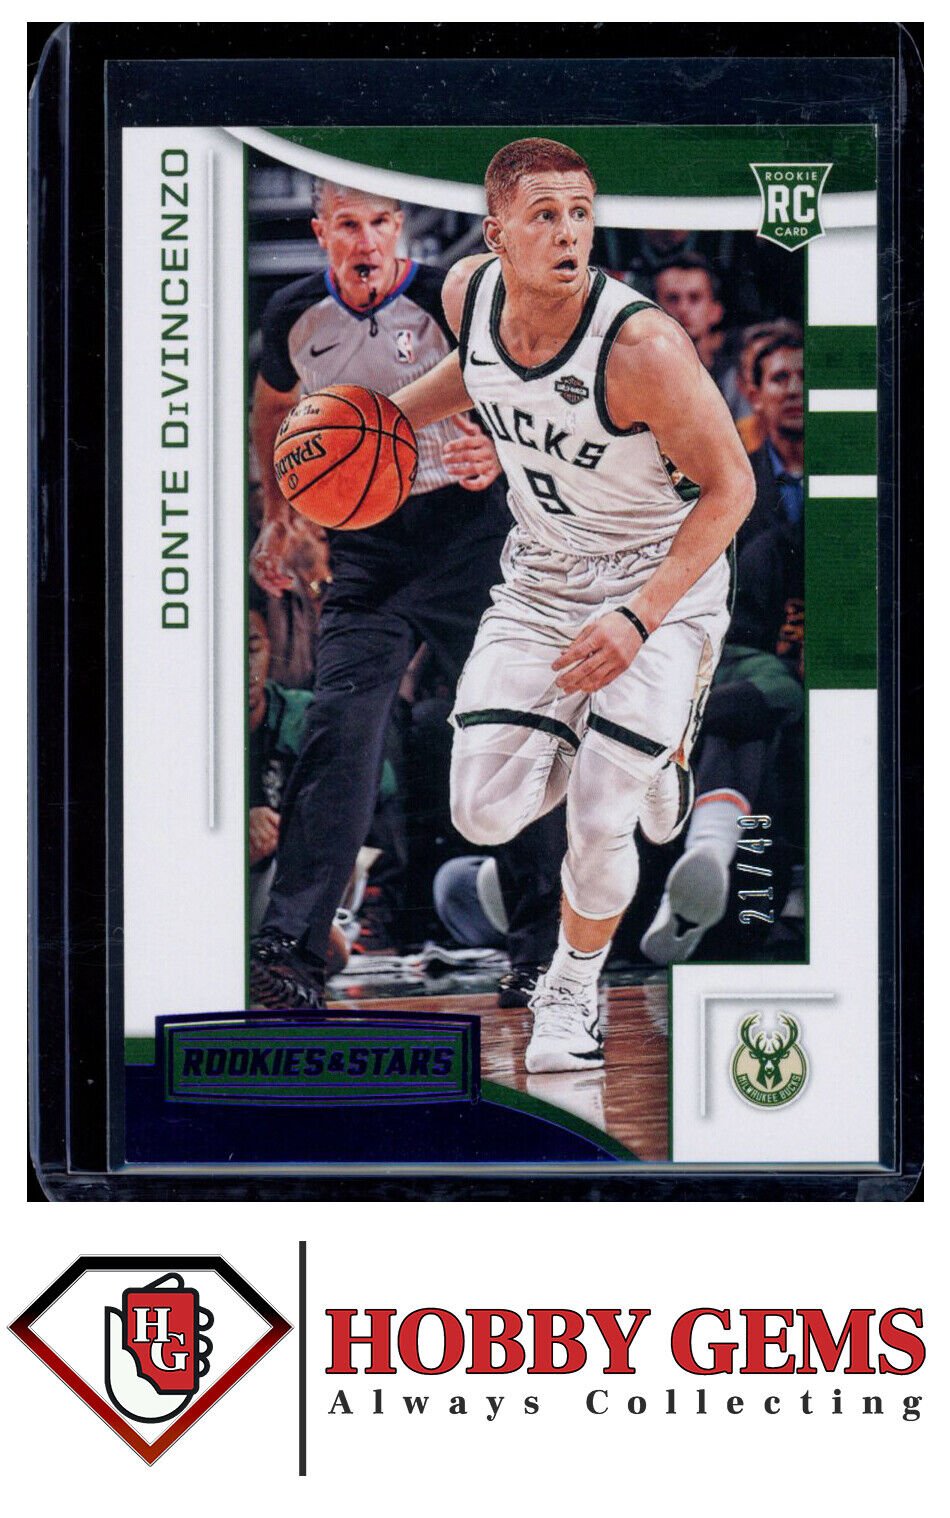 DONTE DIVINCENZO 2018-19 Panini Chronicles RC Rookies & Stars Purple 21/49 #624 Basketball Parallel Serial Numbered - Hobby Gems